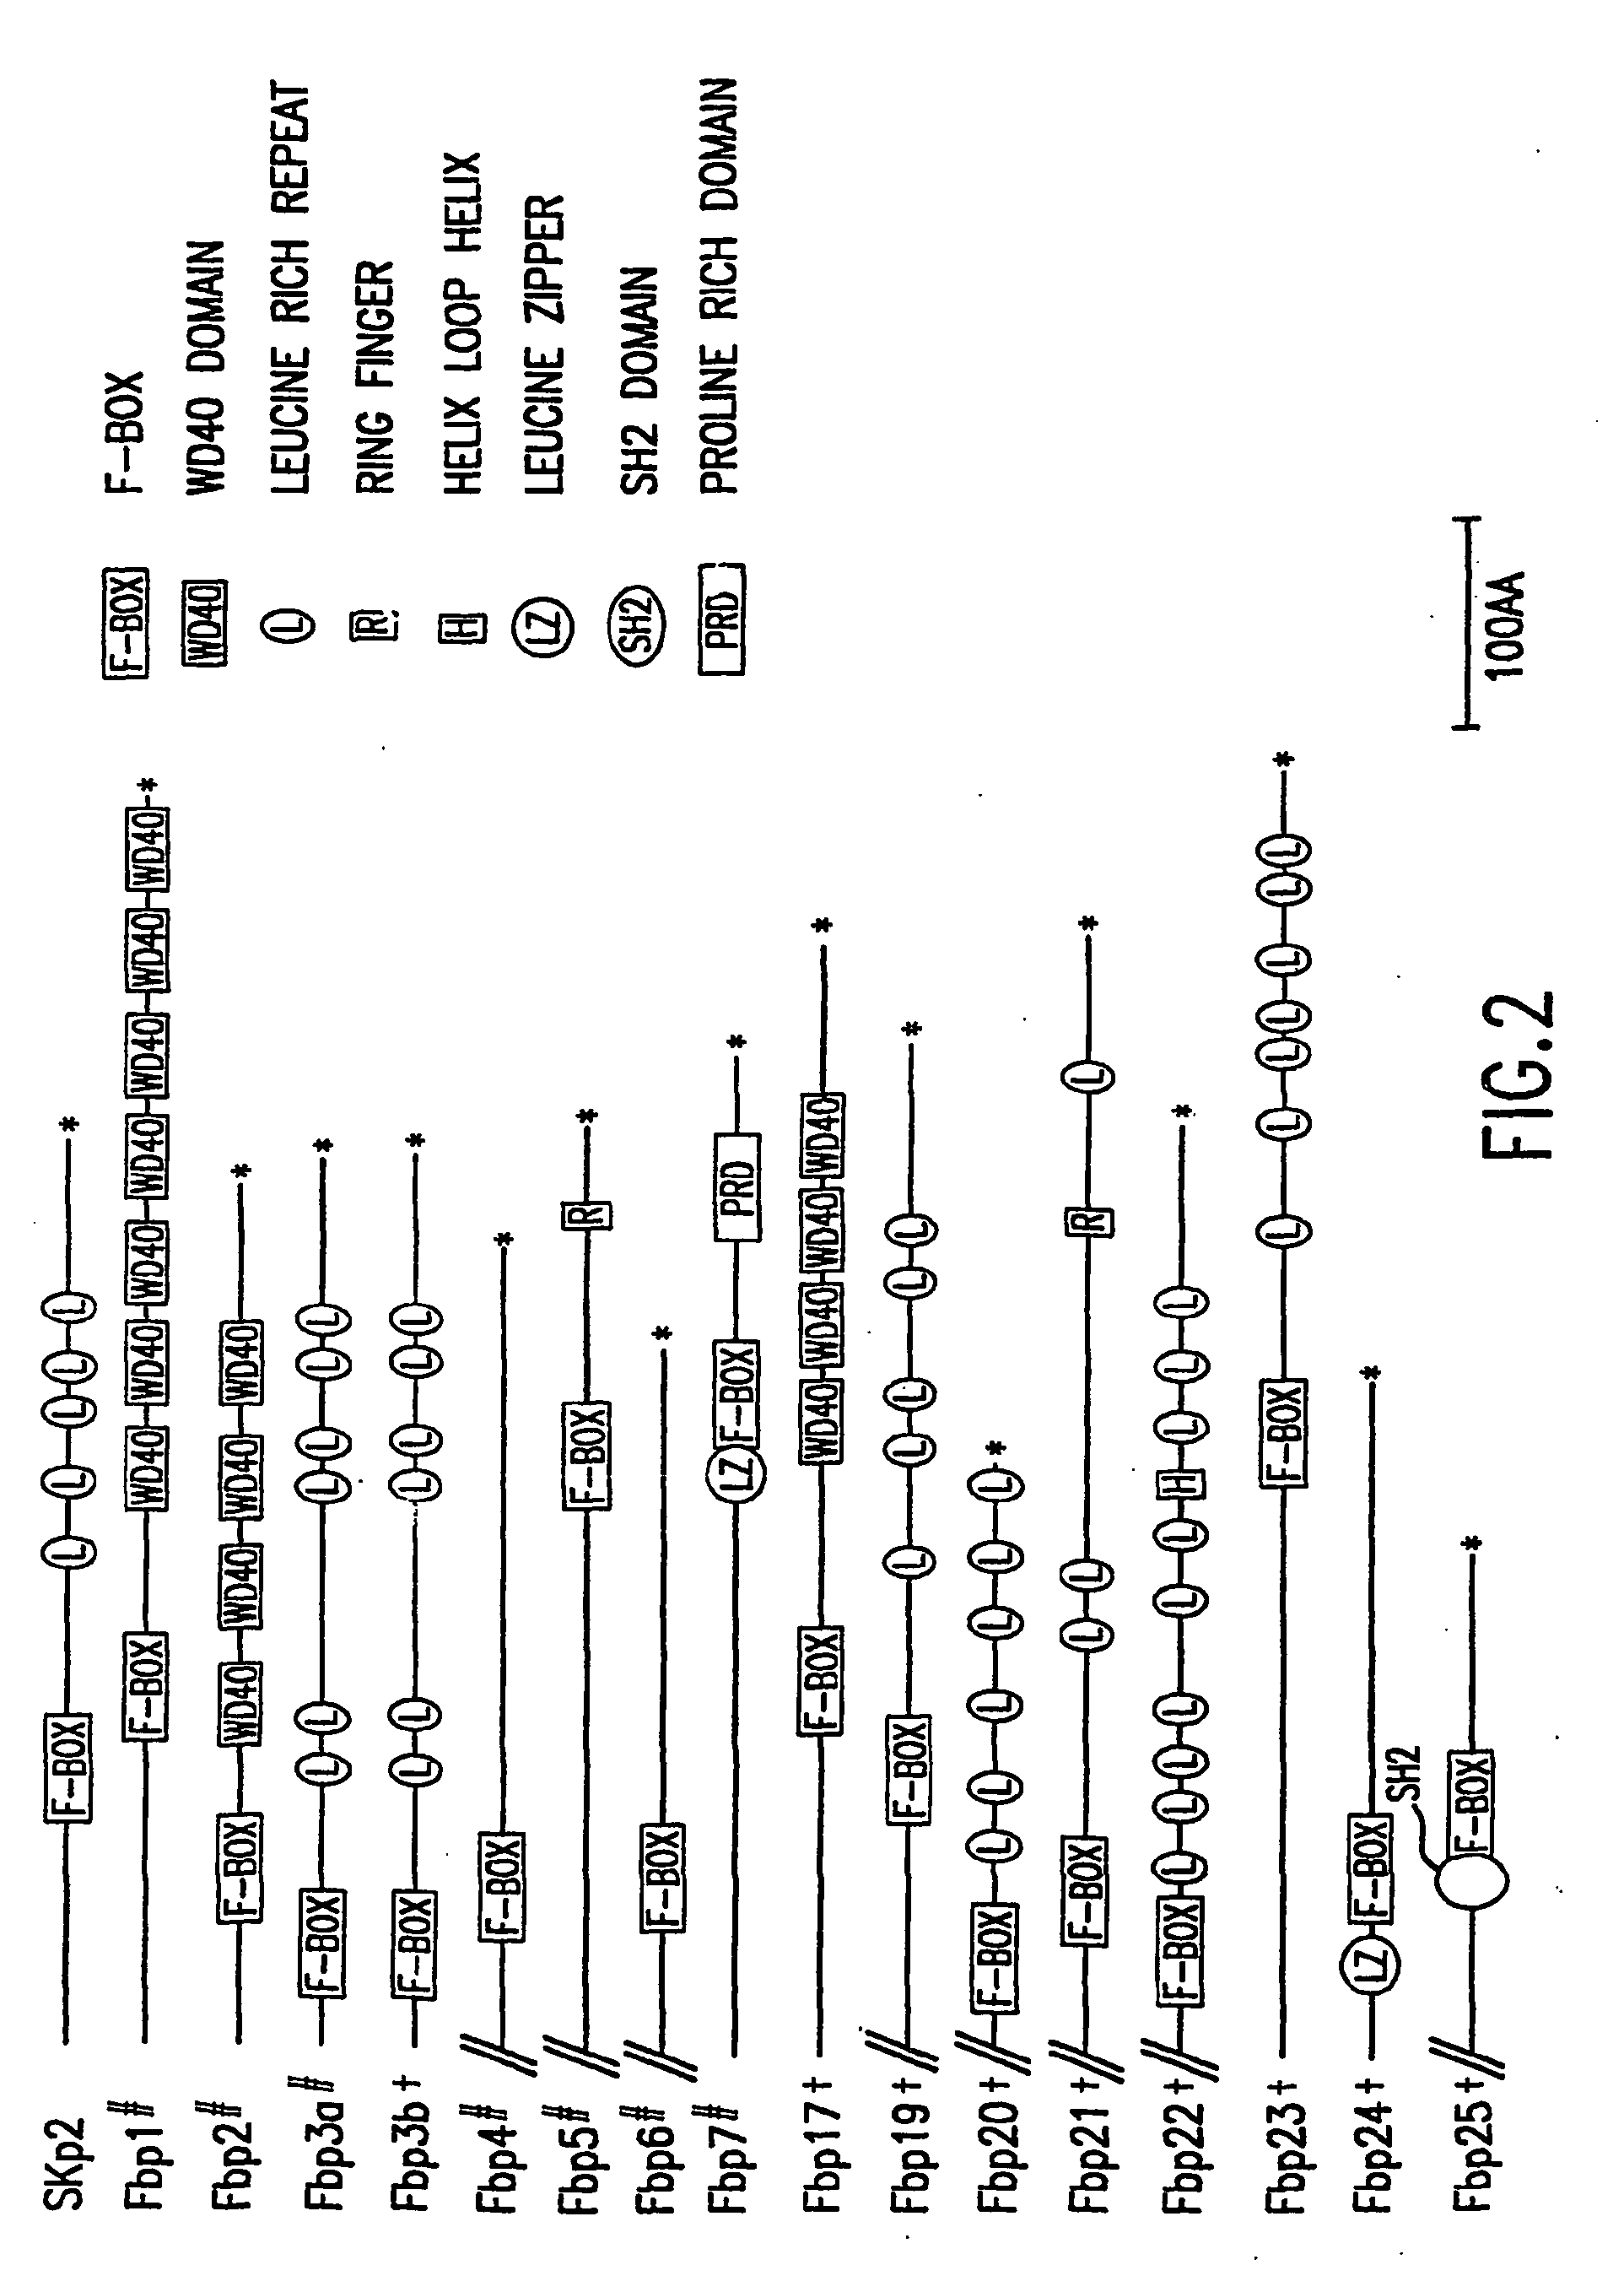 Methods to identify compounds useful for the treatment of proliferative and differentiative disorders